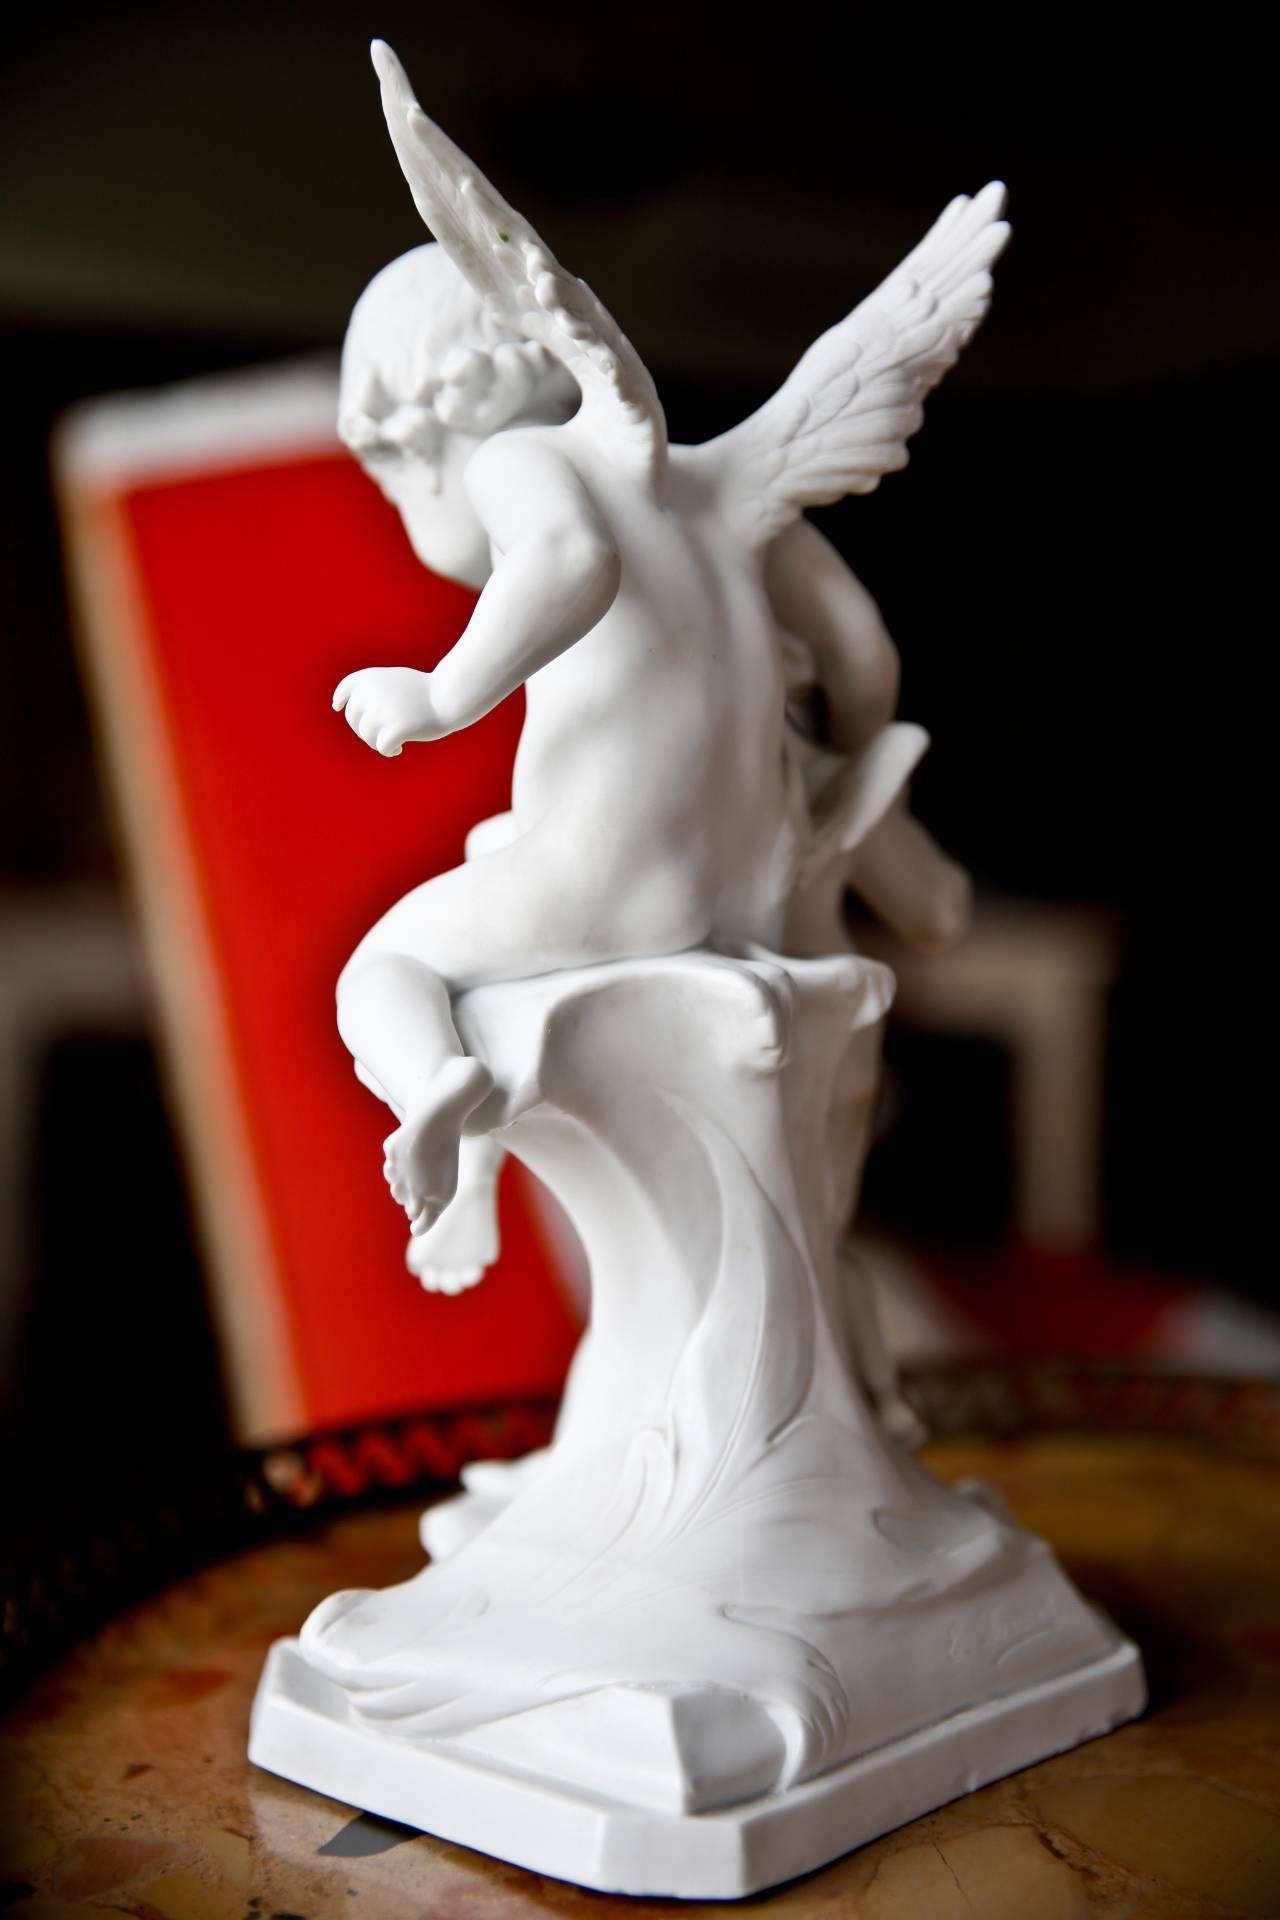 Biscuit porcelain 'Les Deux Anges' representing two embracing little angels.
By the famous French sculptor Edouard Drouot (1859-1945), signed.
There is a very well done restoration at the end of one of the wings.
France, circa 1890-1920.